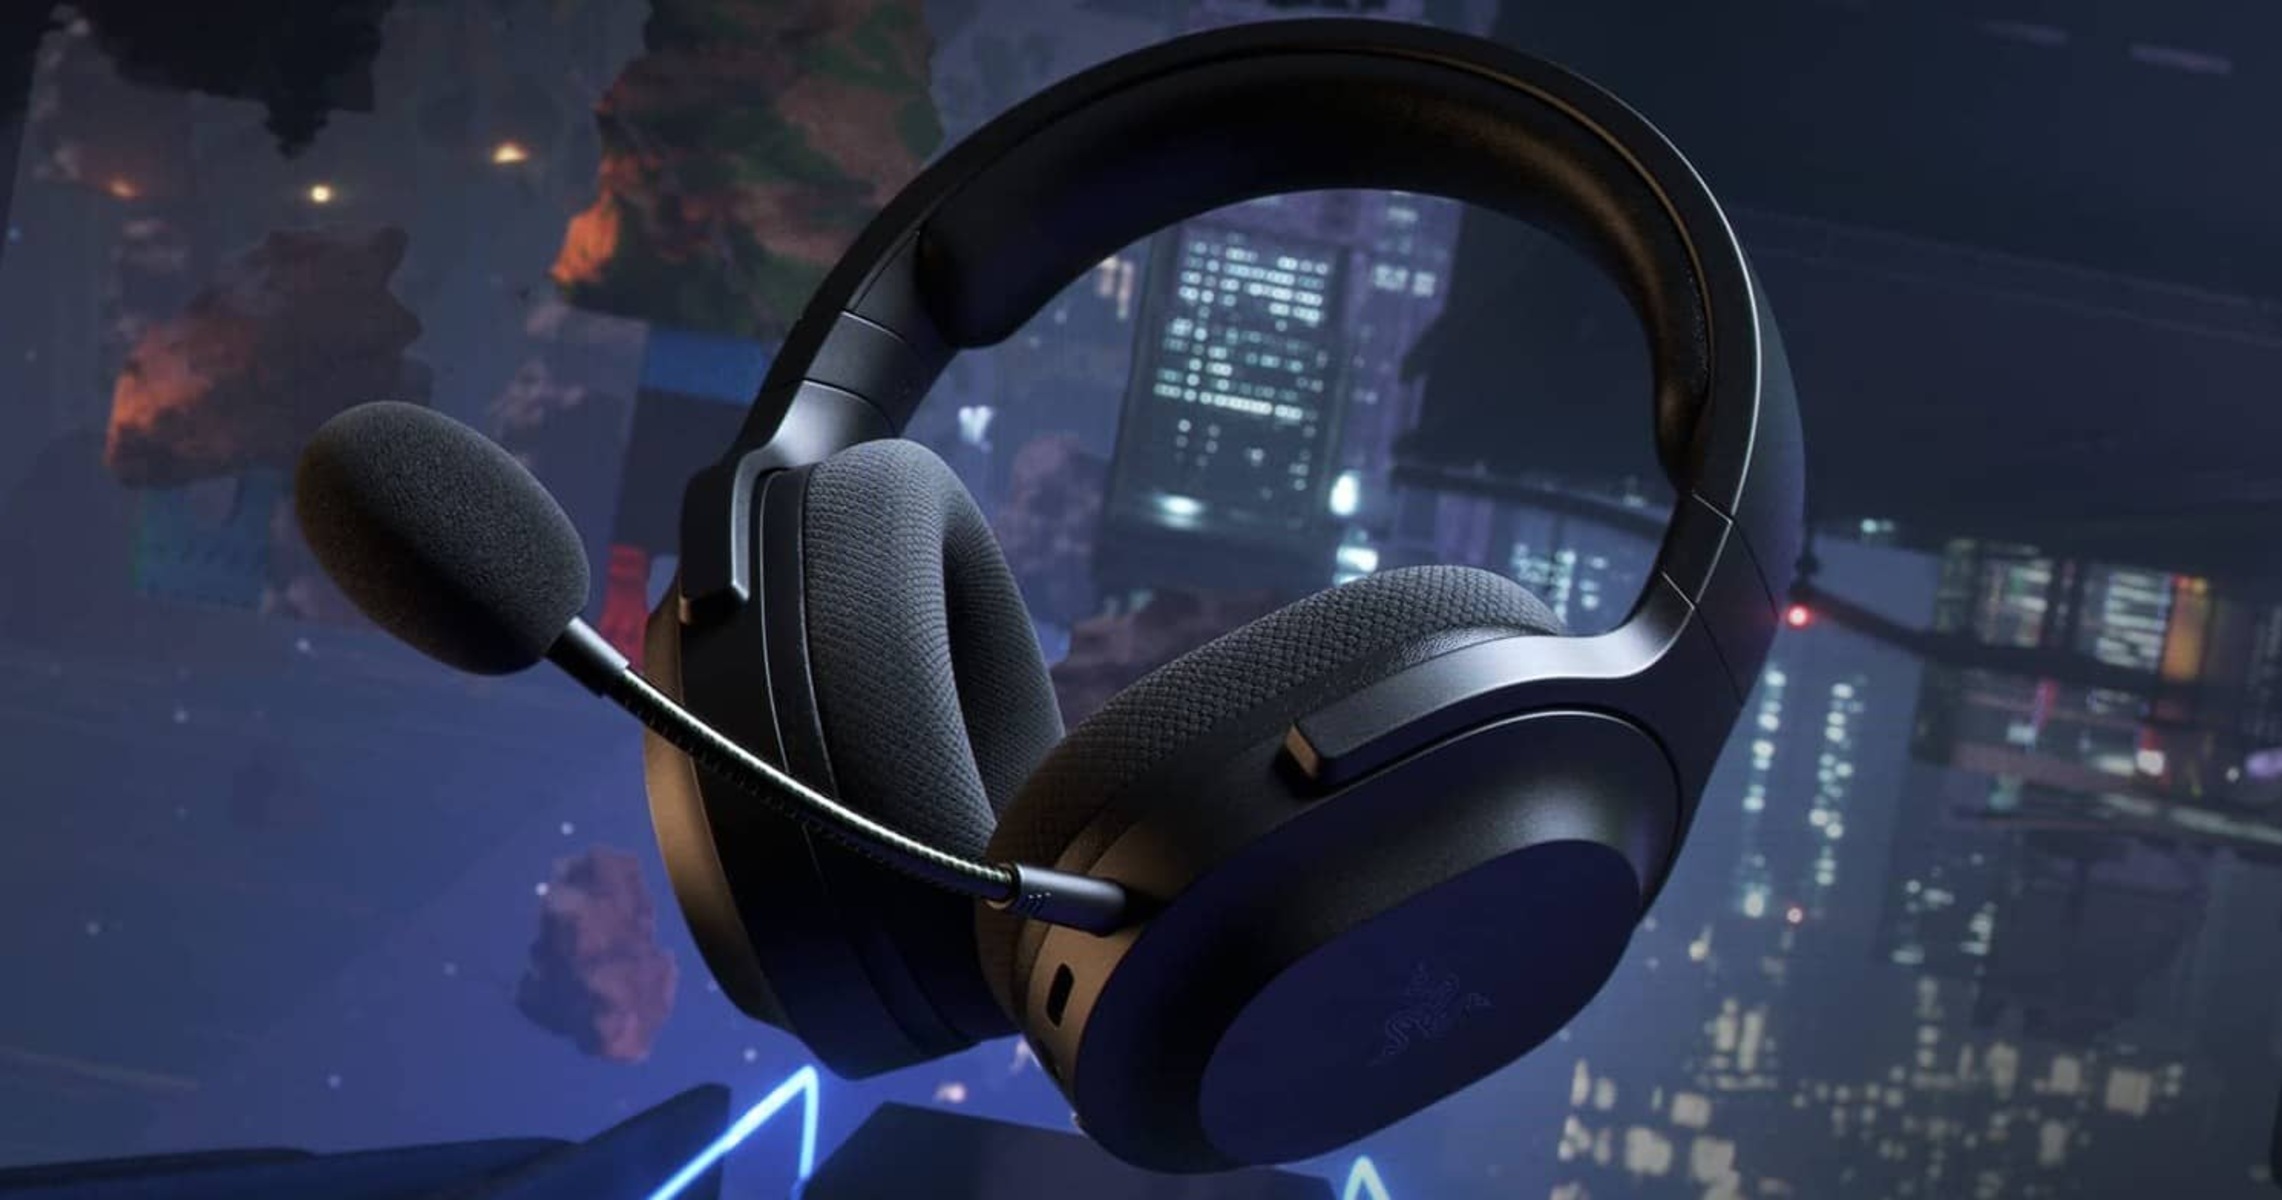 How To Configure Tecknet 7.1 Gaming Headset For Surround Sound On Windows 10